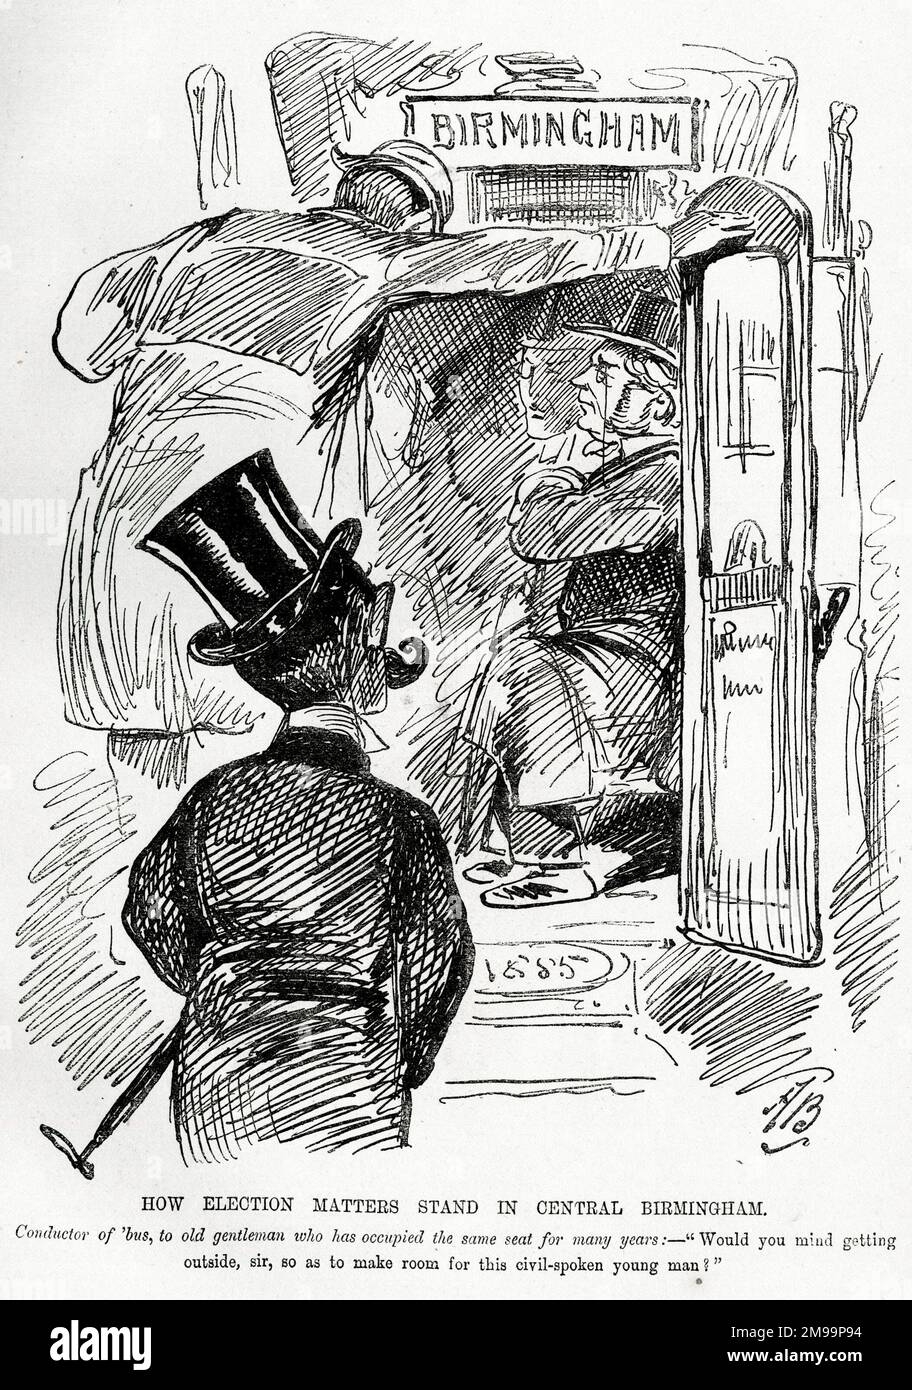 Cartoon, How election matters stand in Central Birmingham - Would you mind getting outside, sir, so as to make room for this civil-spoken young man? In the autumn General Election of 1885 Randolph Churchill contested Birmingham Central against the Liberal candidate, John Bright, but was defeated. Stock Photo